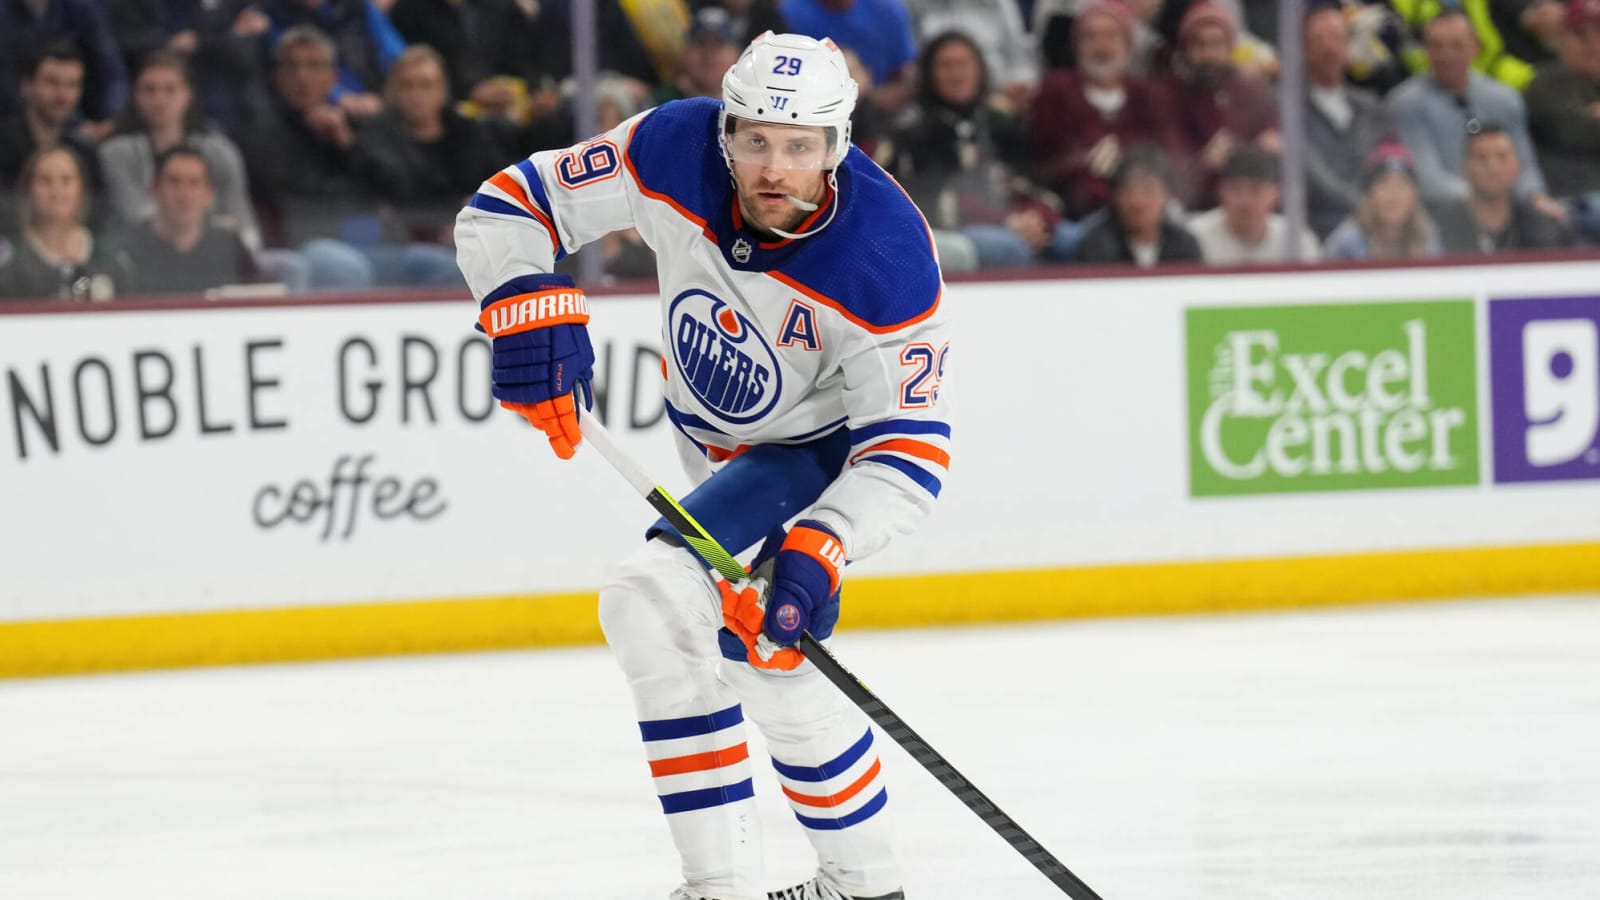 Two goals by Leon Draisaitl completes the comeback in Boston for Oilers fifth consecutive win